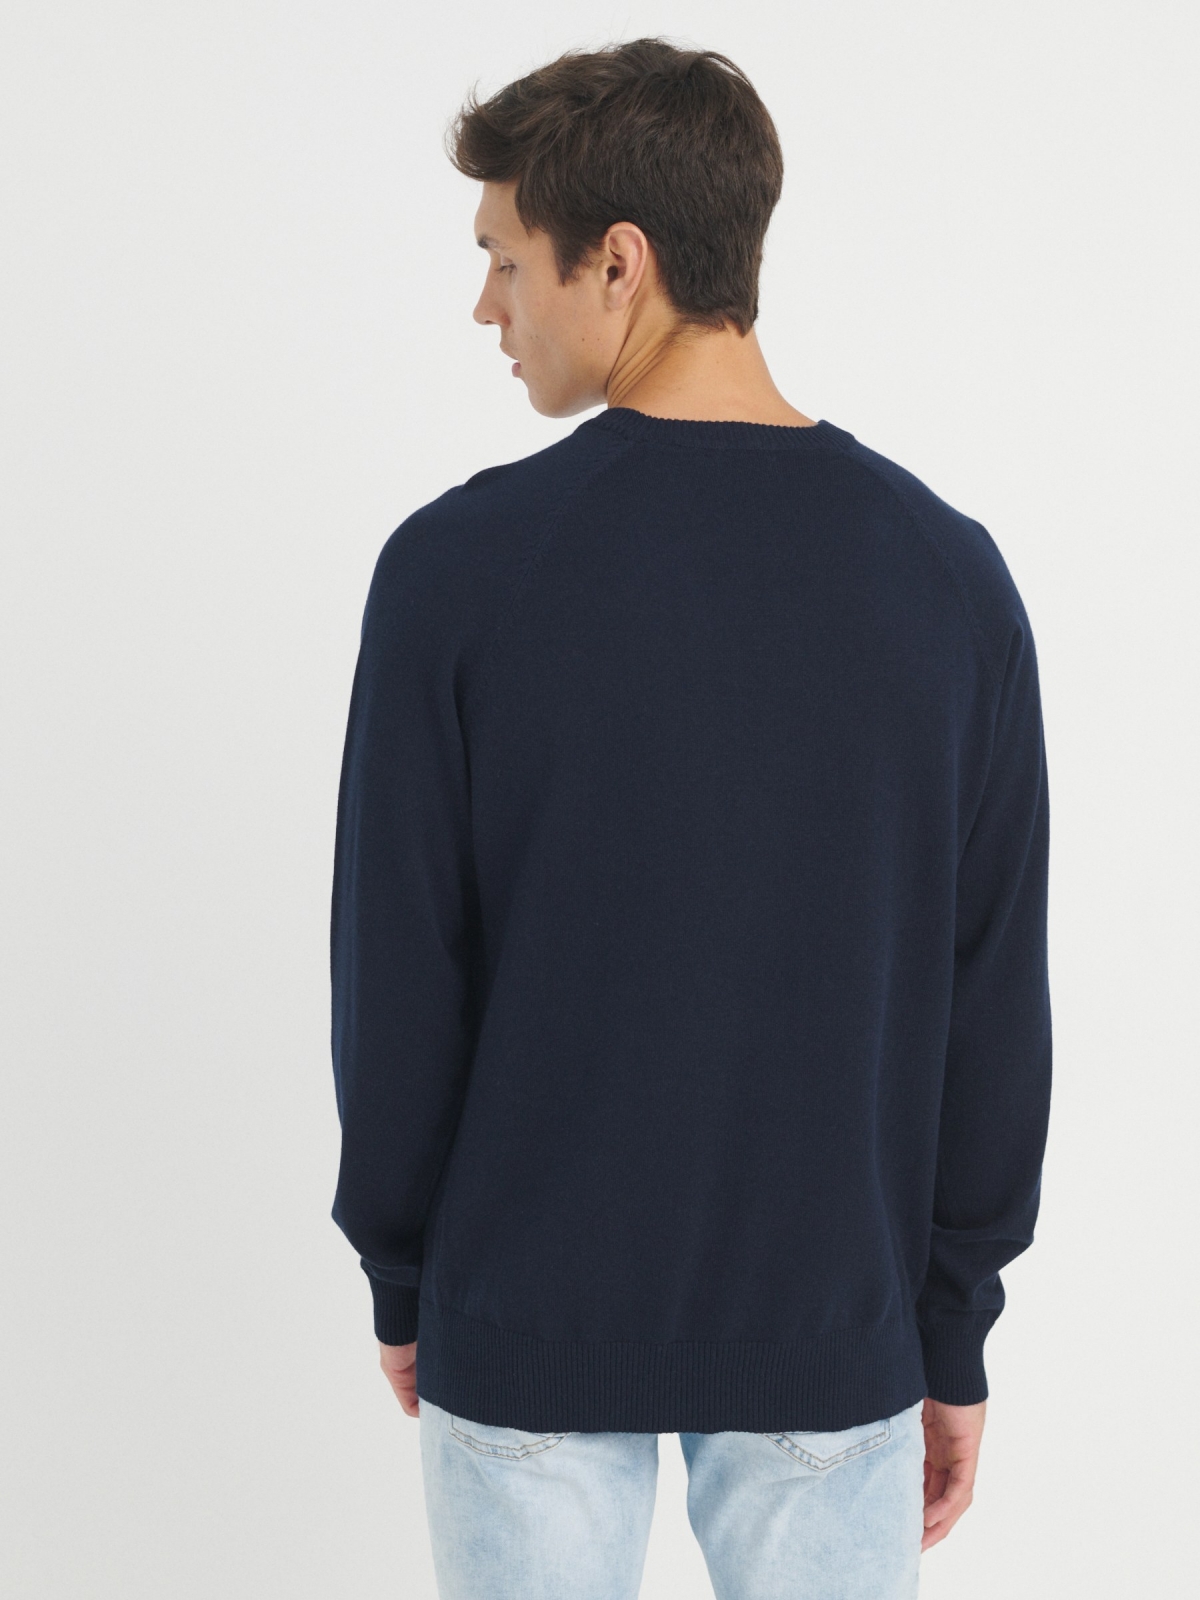 Plain sweater round neck navy middle back view